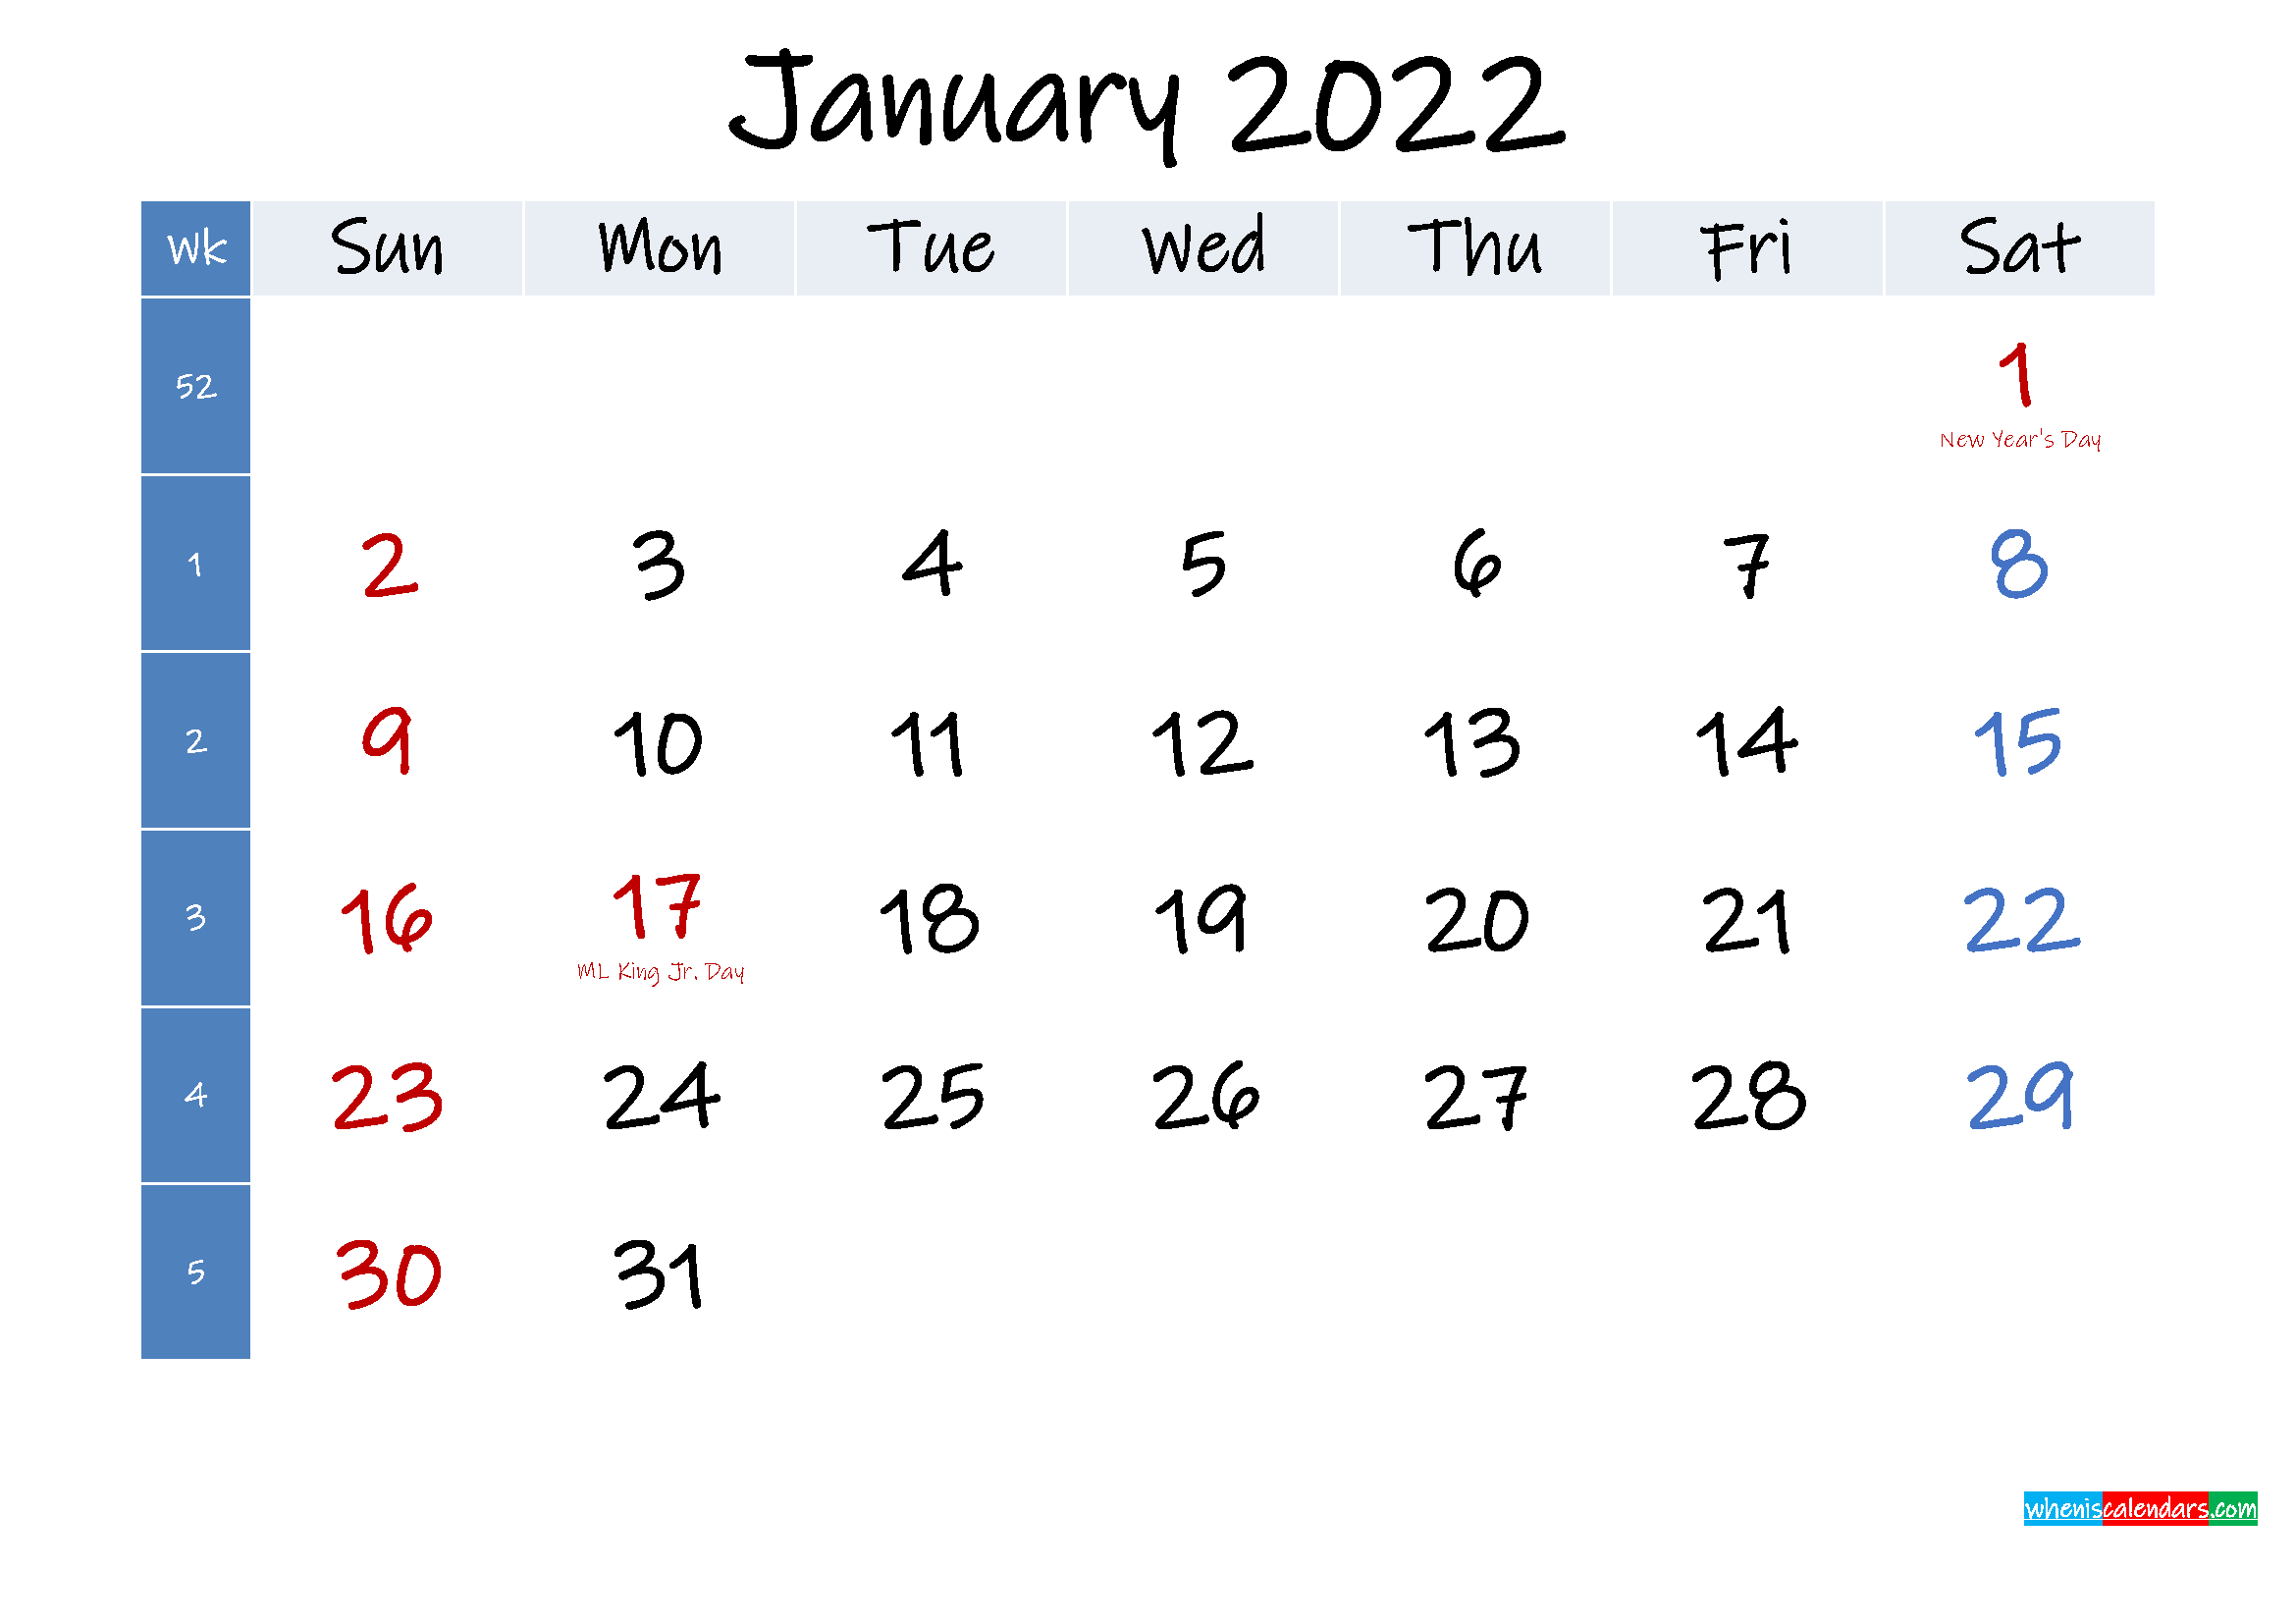 January 2022 Free Printable Calendar With Holidays  Template No.ink22M349 within Free Landscape Architecture Calendar